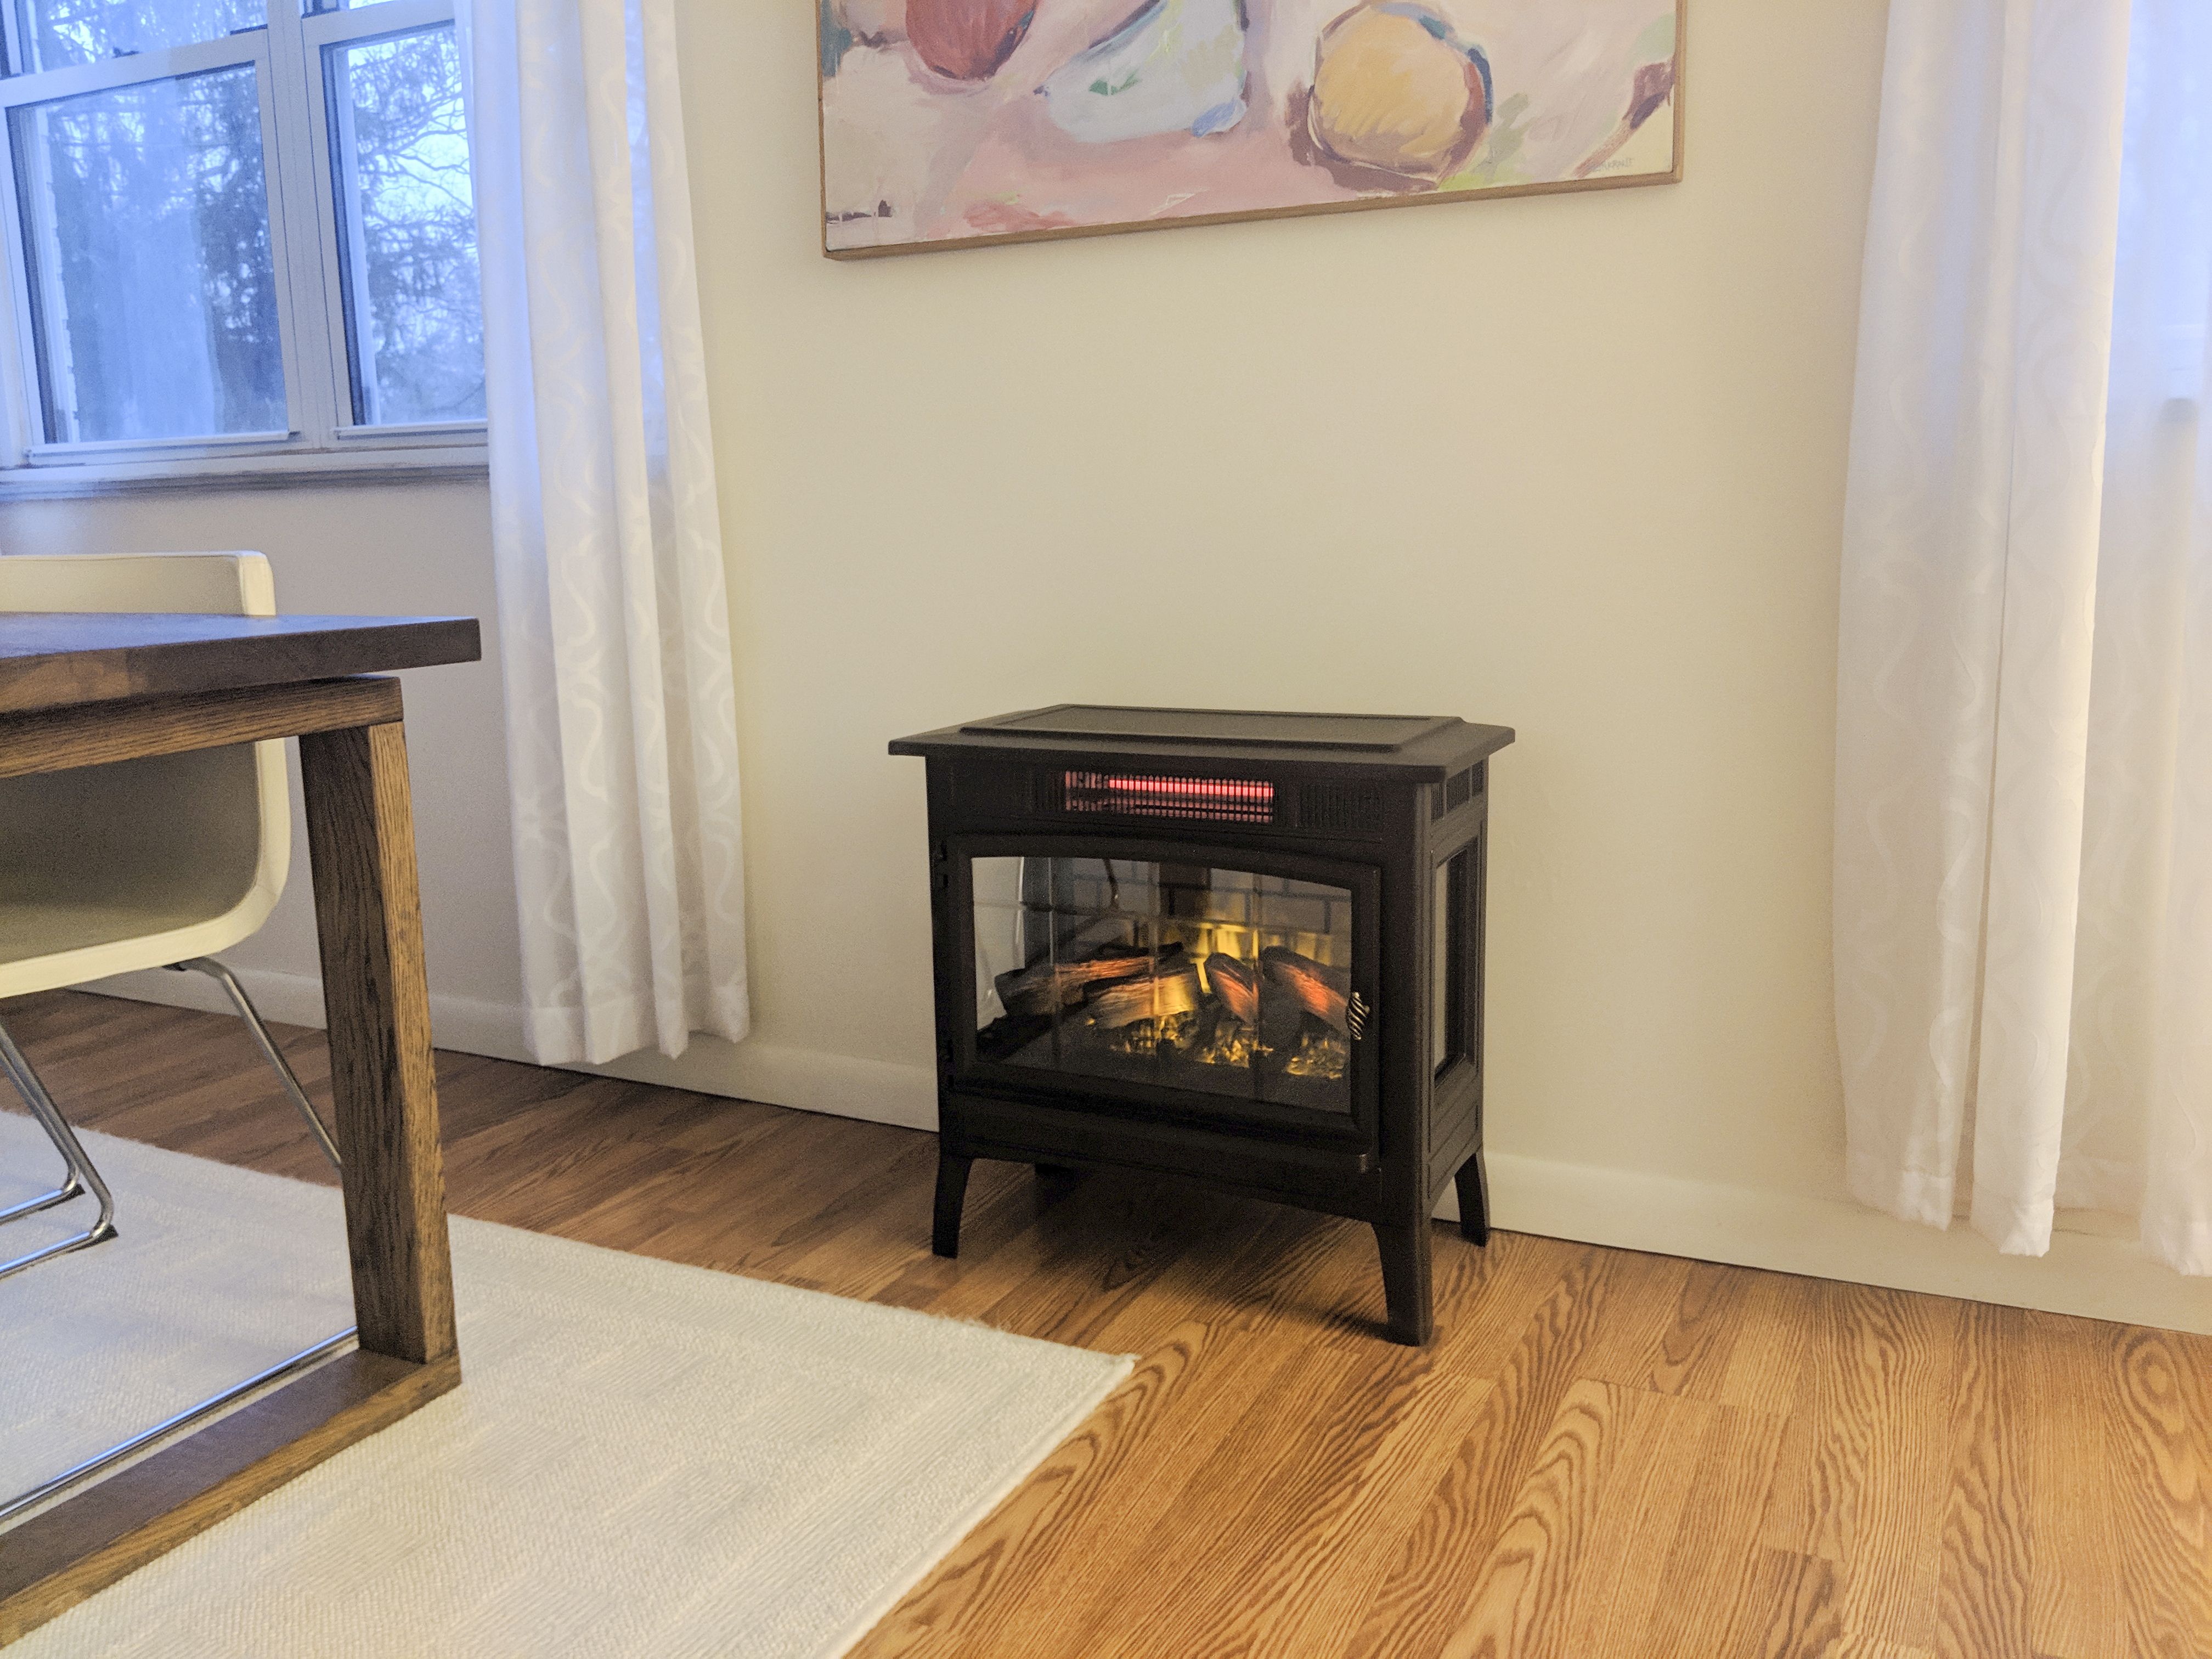 220 Volt Electric Fireplace Best Of the 10 Best Electric Heaters for Your Home In 2019